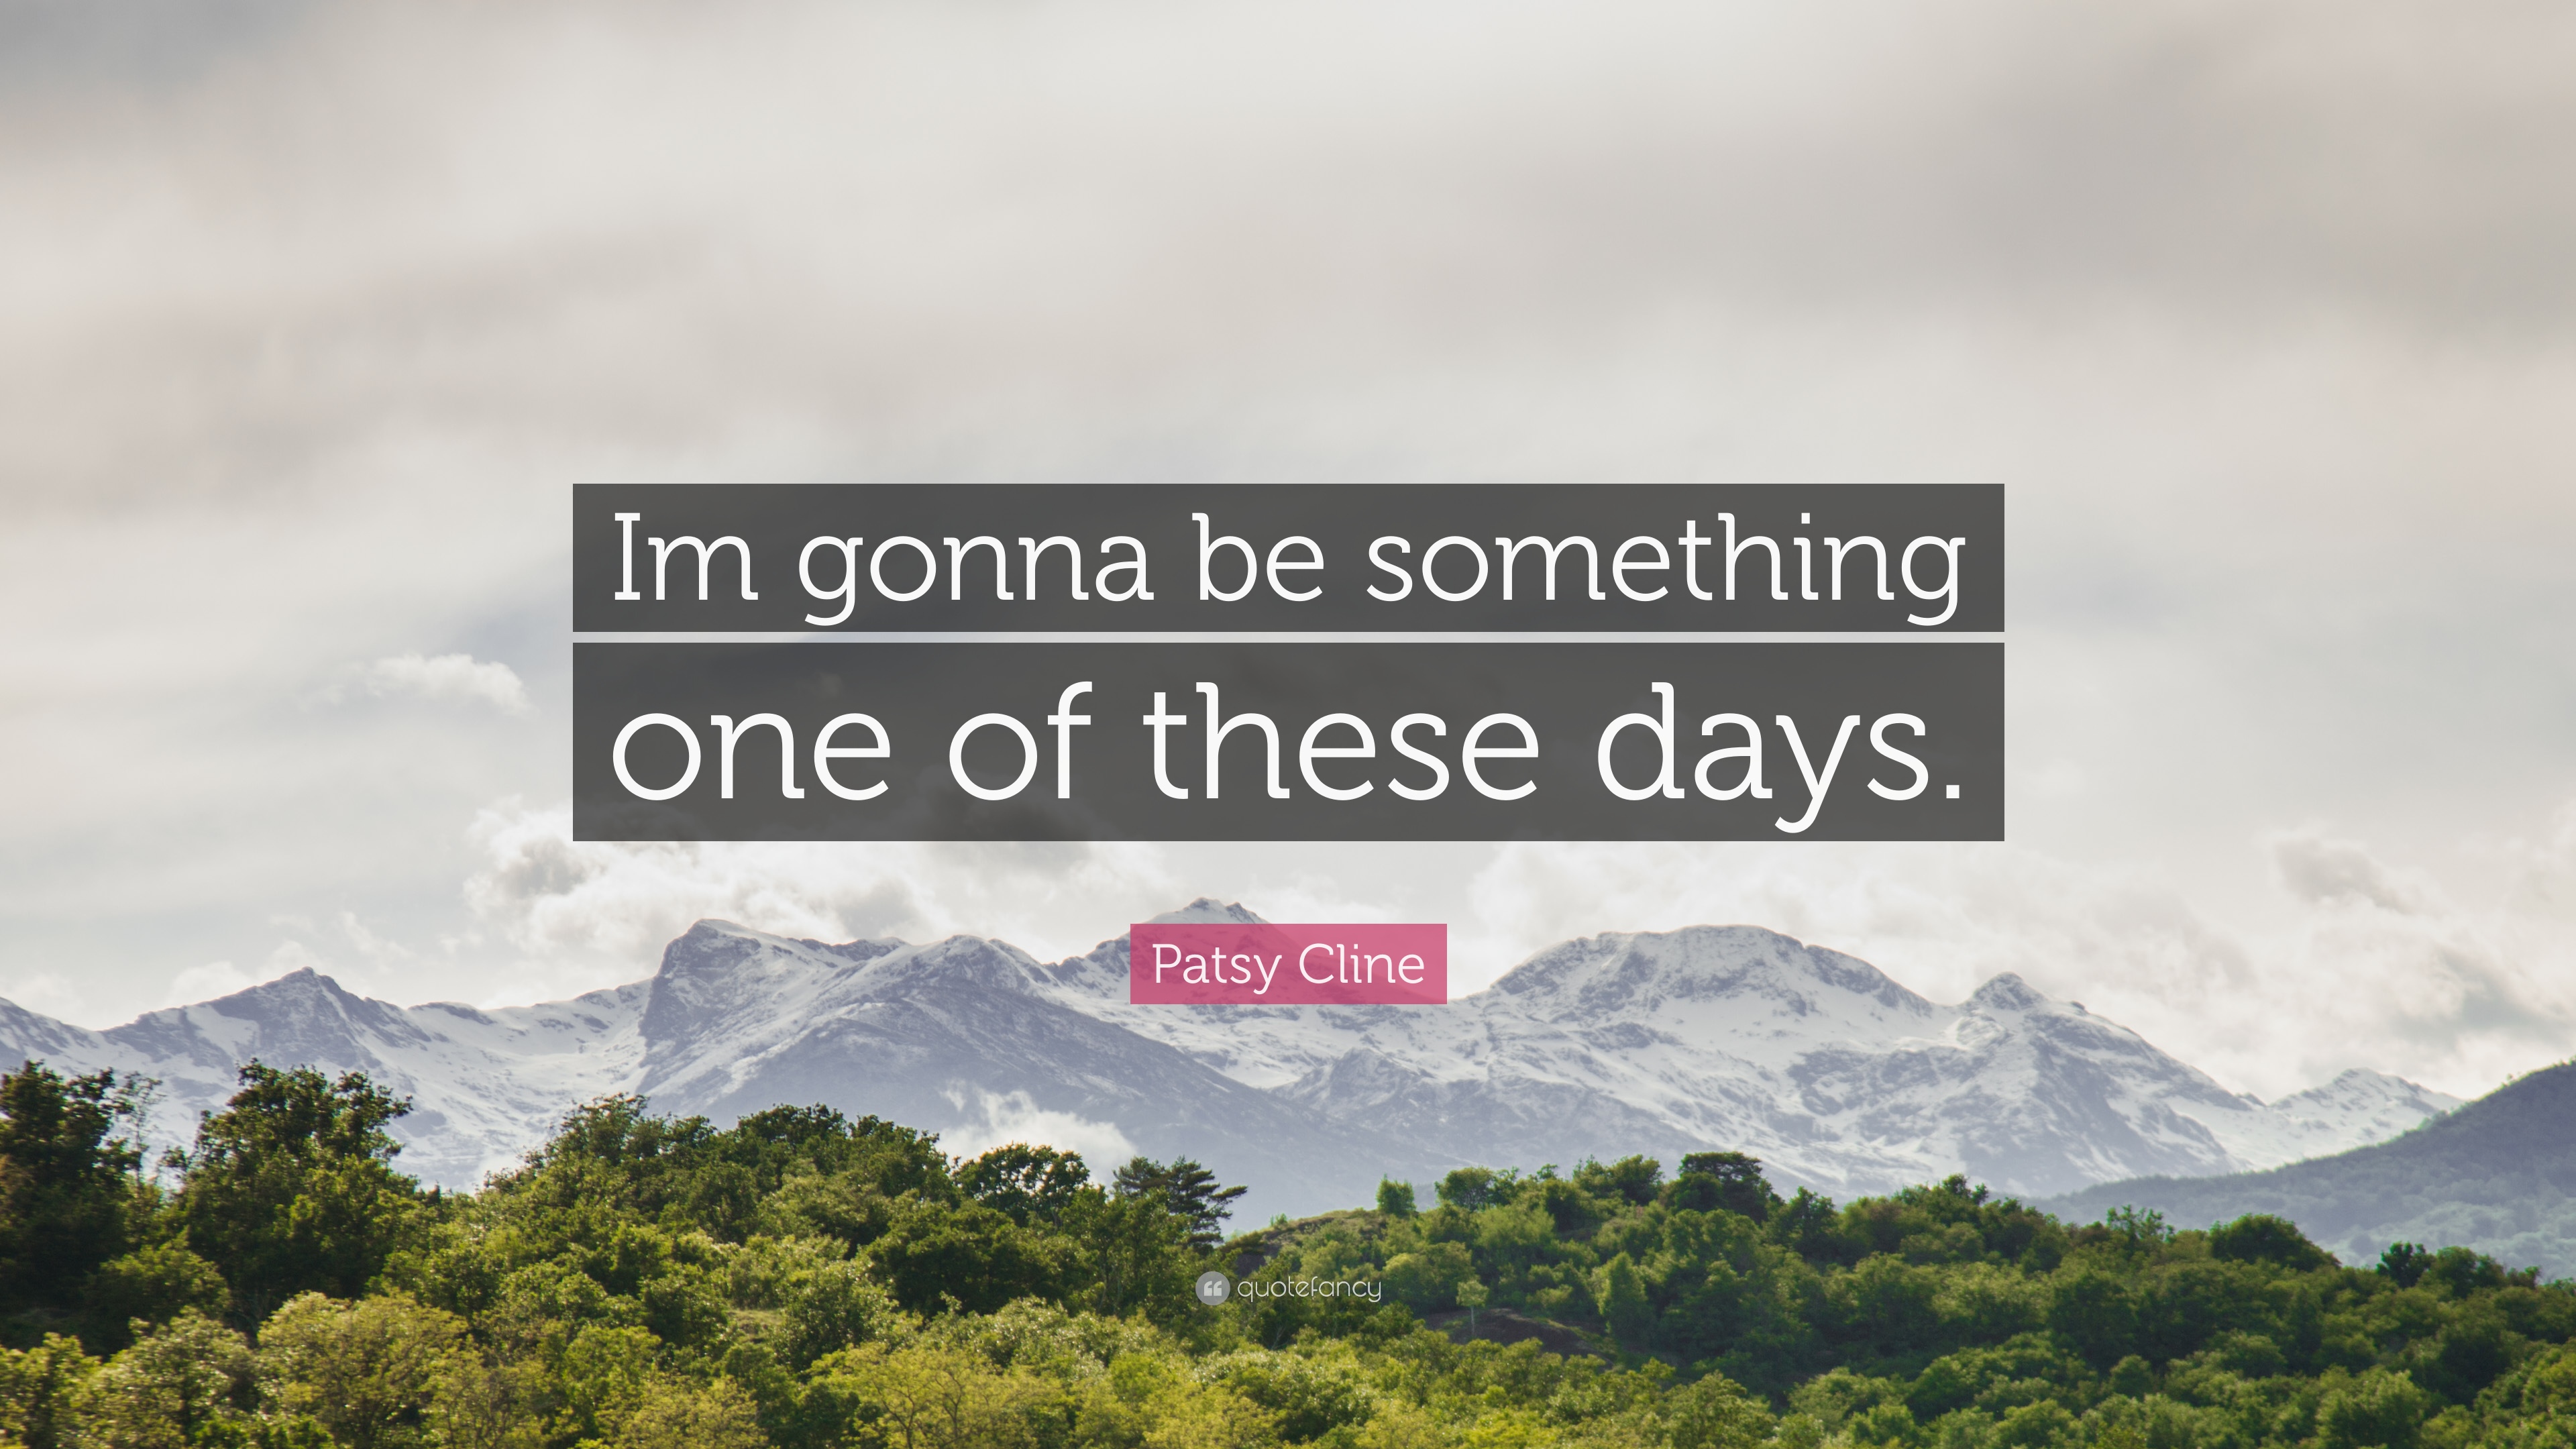 Patsy Cline Quote: “Im gonna be something one of these days.” 7